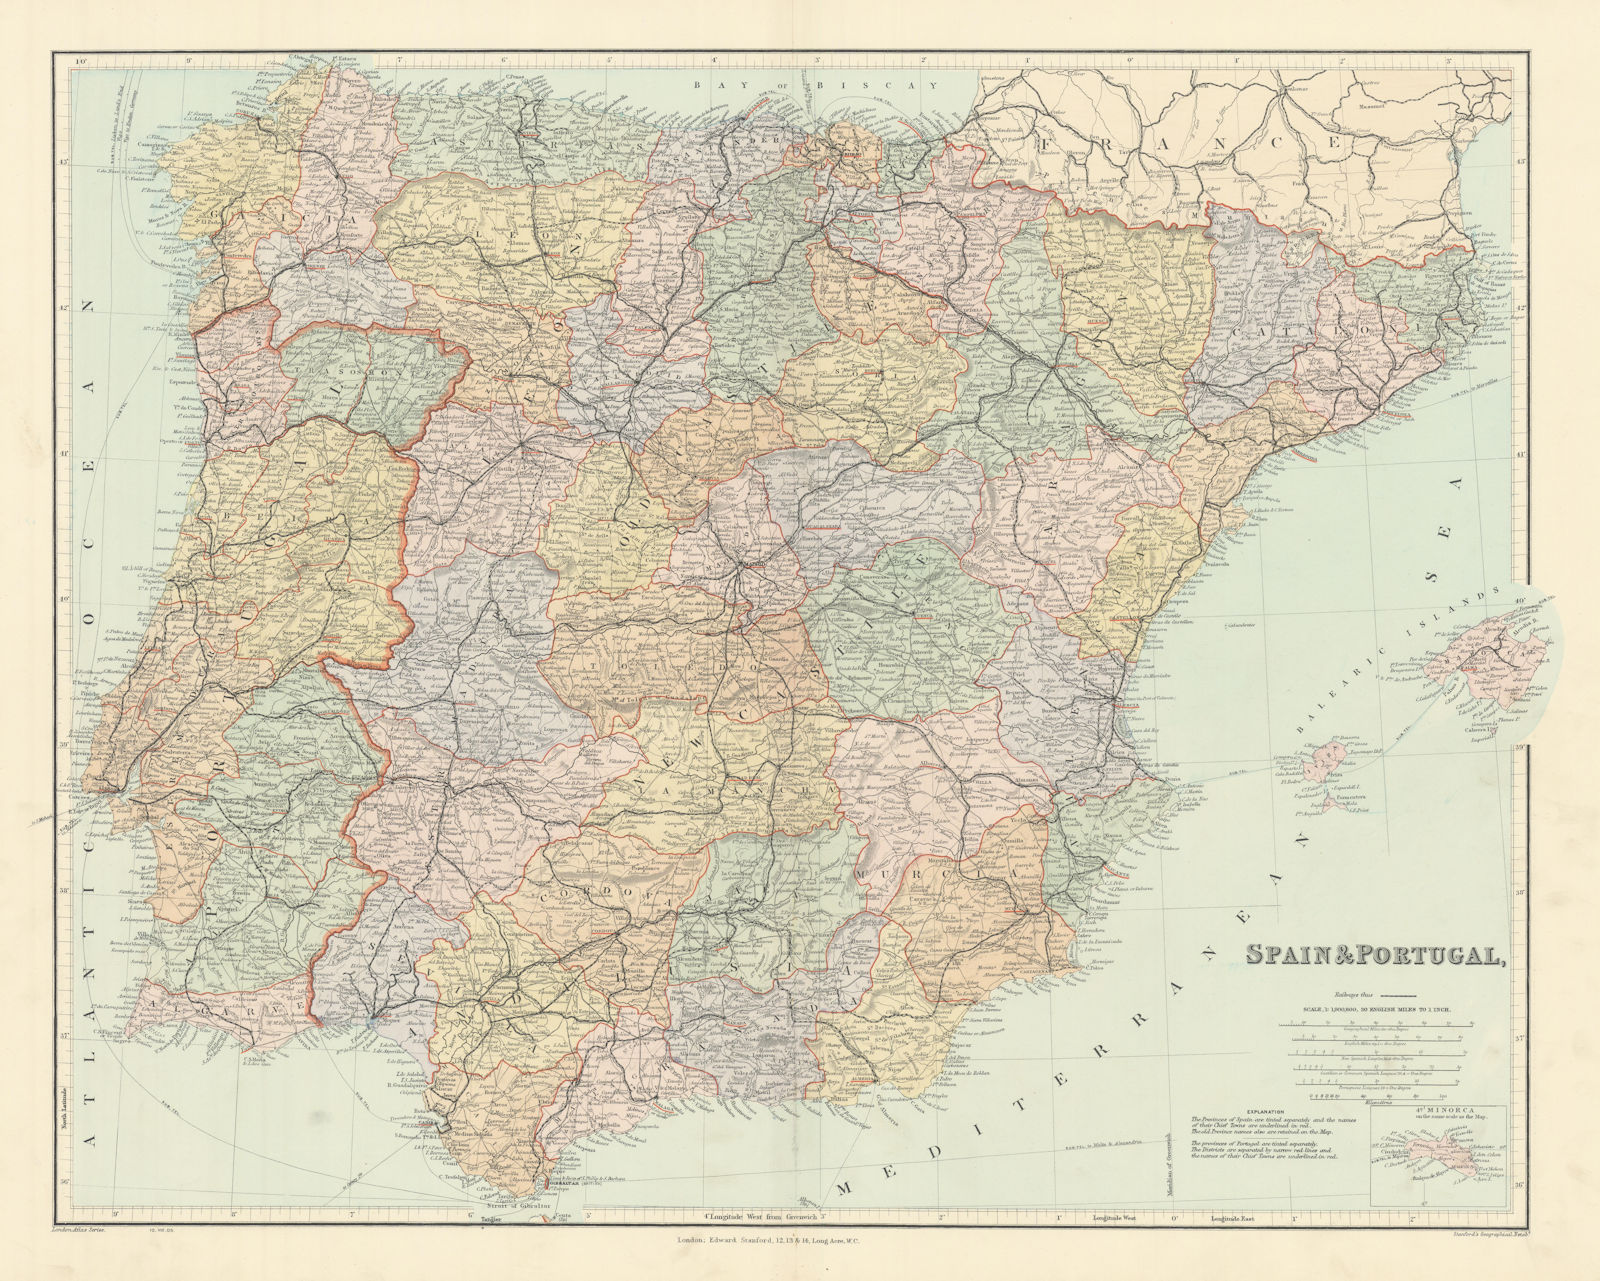 Spain & Portugal. Iberia. Railways. Large 52x65cm. STANFORD 1904 old map